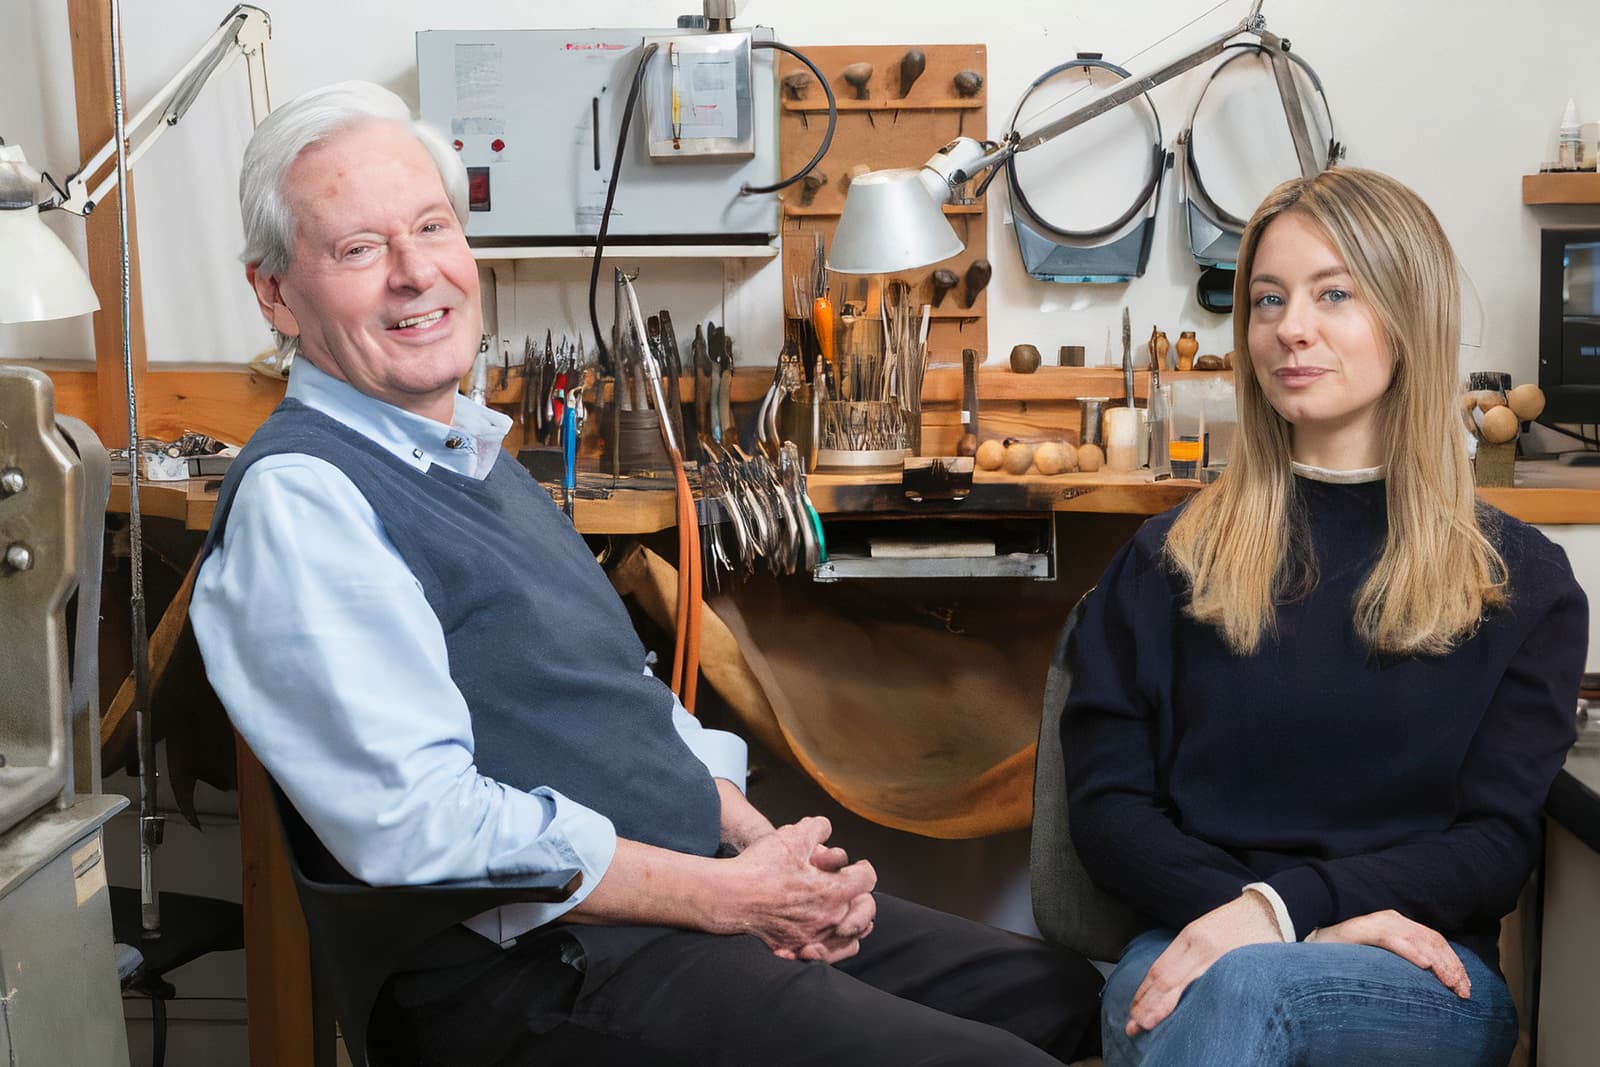 Jessie Thomas and her father, David Thomas, who has enjoyed a long career in jewellery design